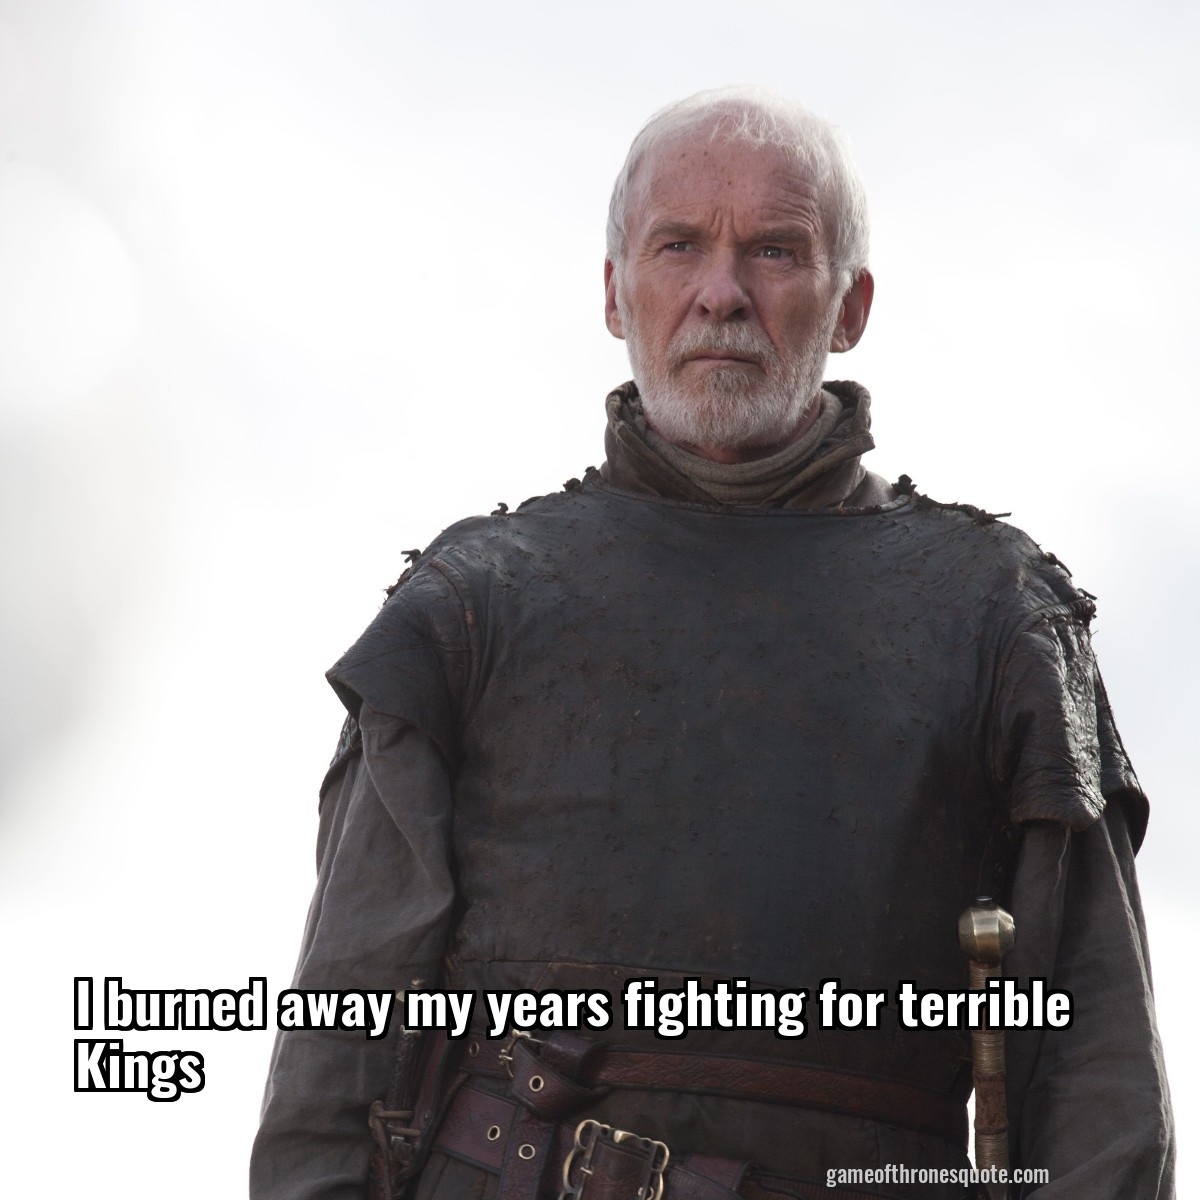 I burned away my years fighting for terrible Kings